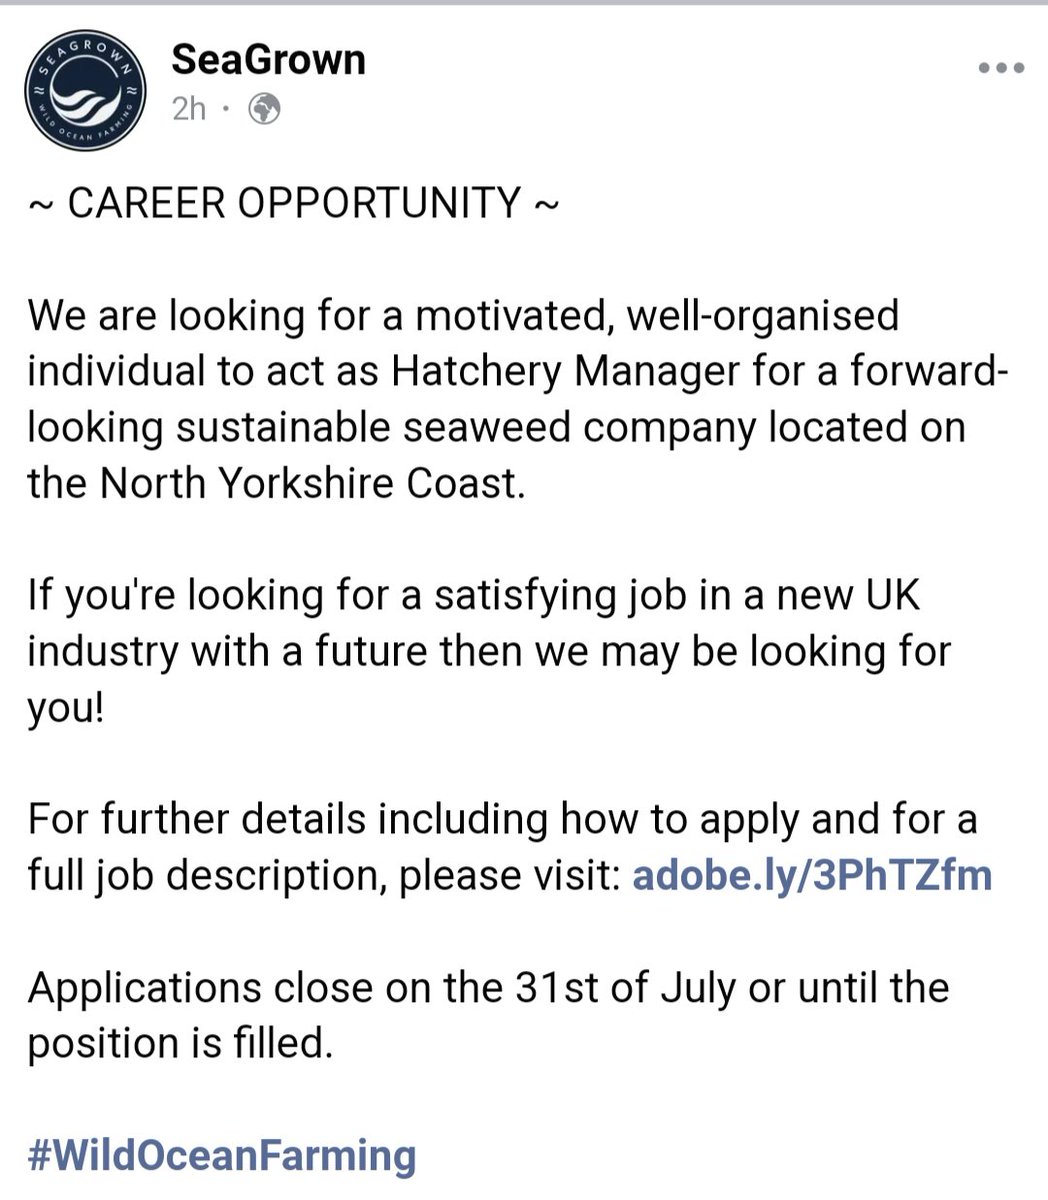 How about working for pioneers of offshore seaweed farming in the UK? Our friends @seagrown are recruiting a Seaweed Hatchery Manager. One-off specialist marine job in Yorkshire. Details below. Retweets to networks please @BD_Stew @rodney_forster @CF_Conf @Pippa_J_Moore